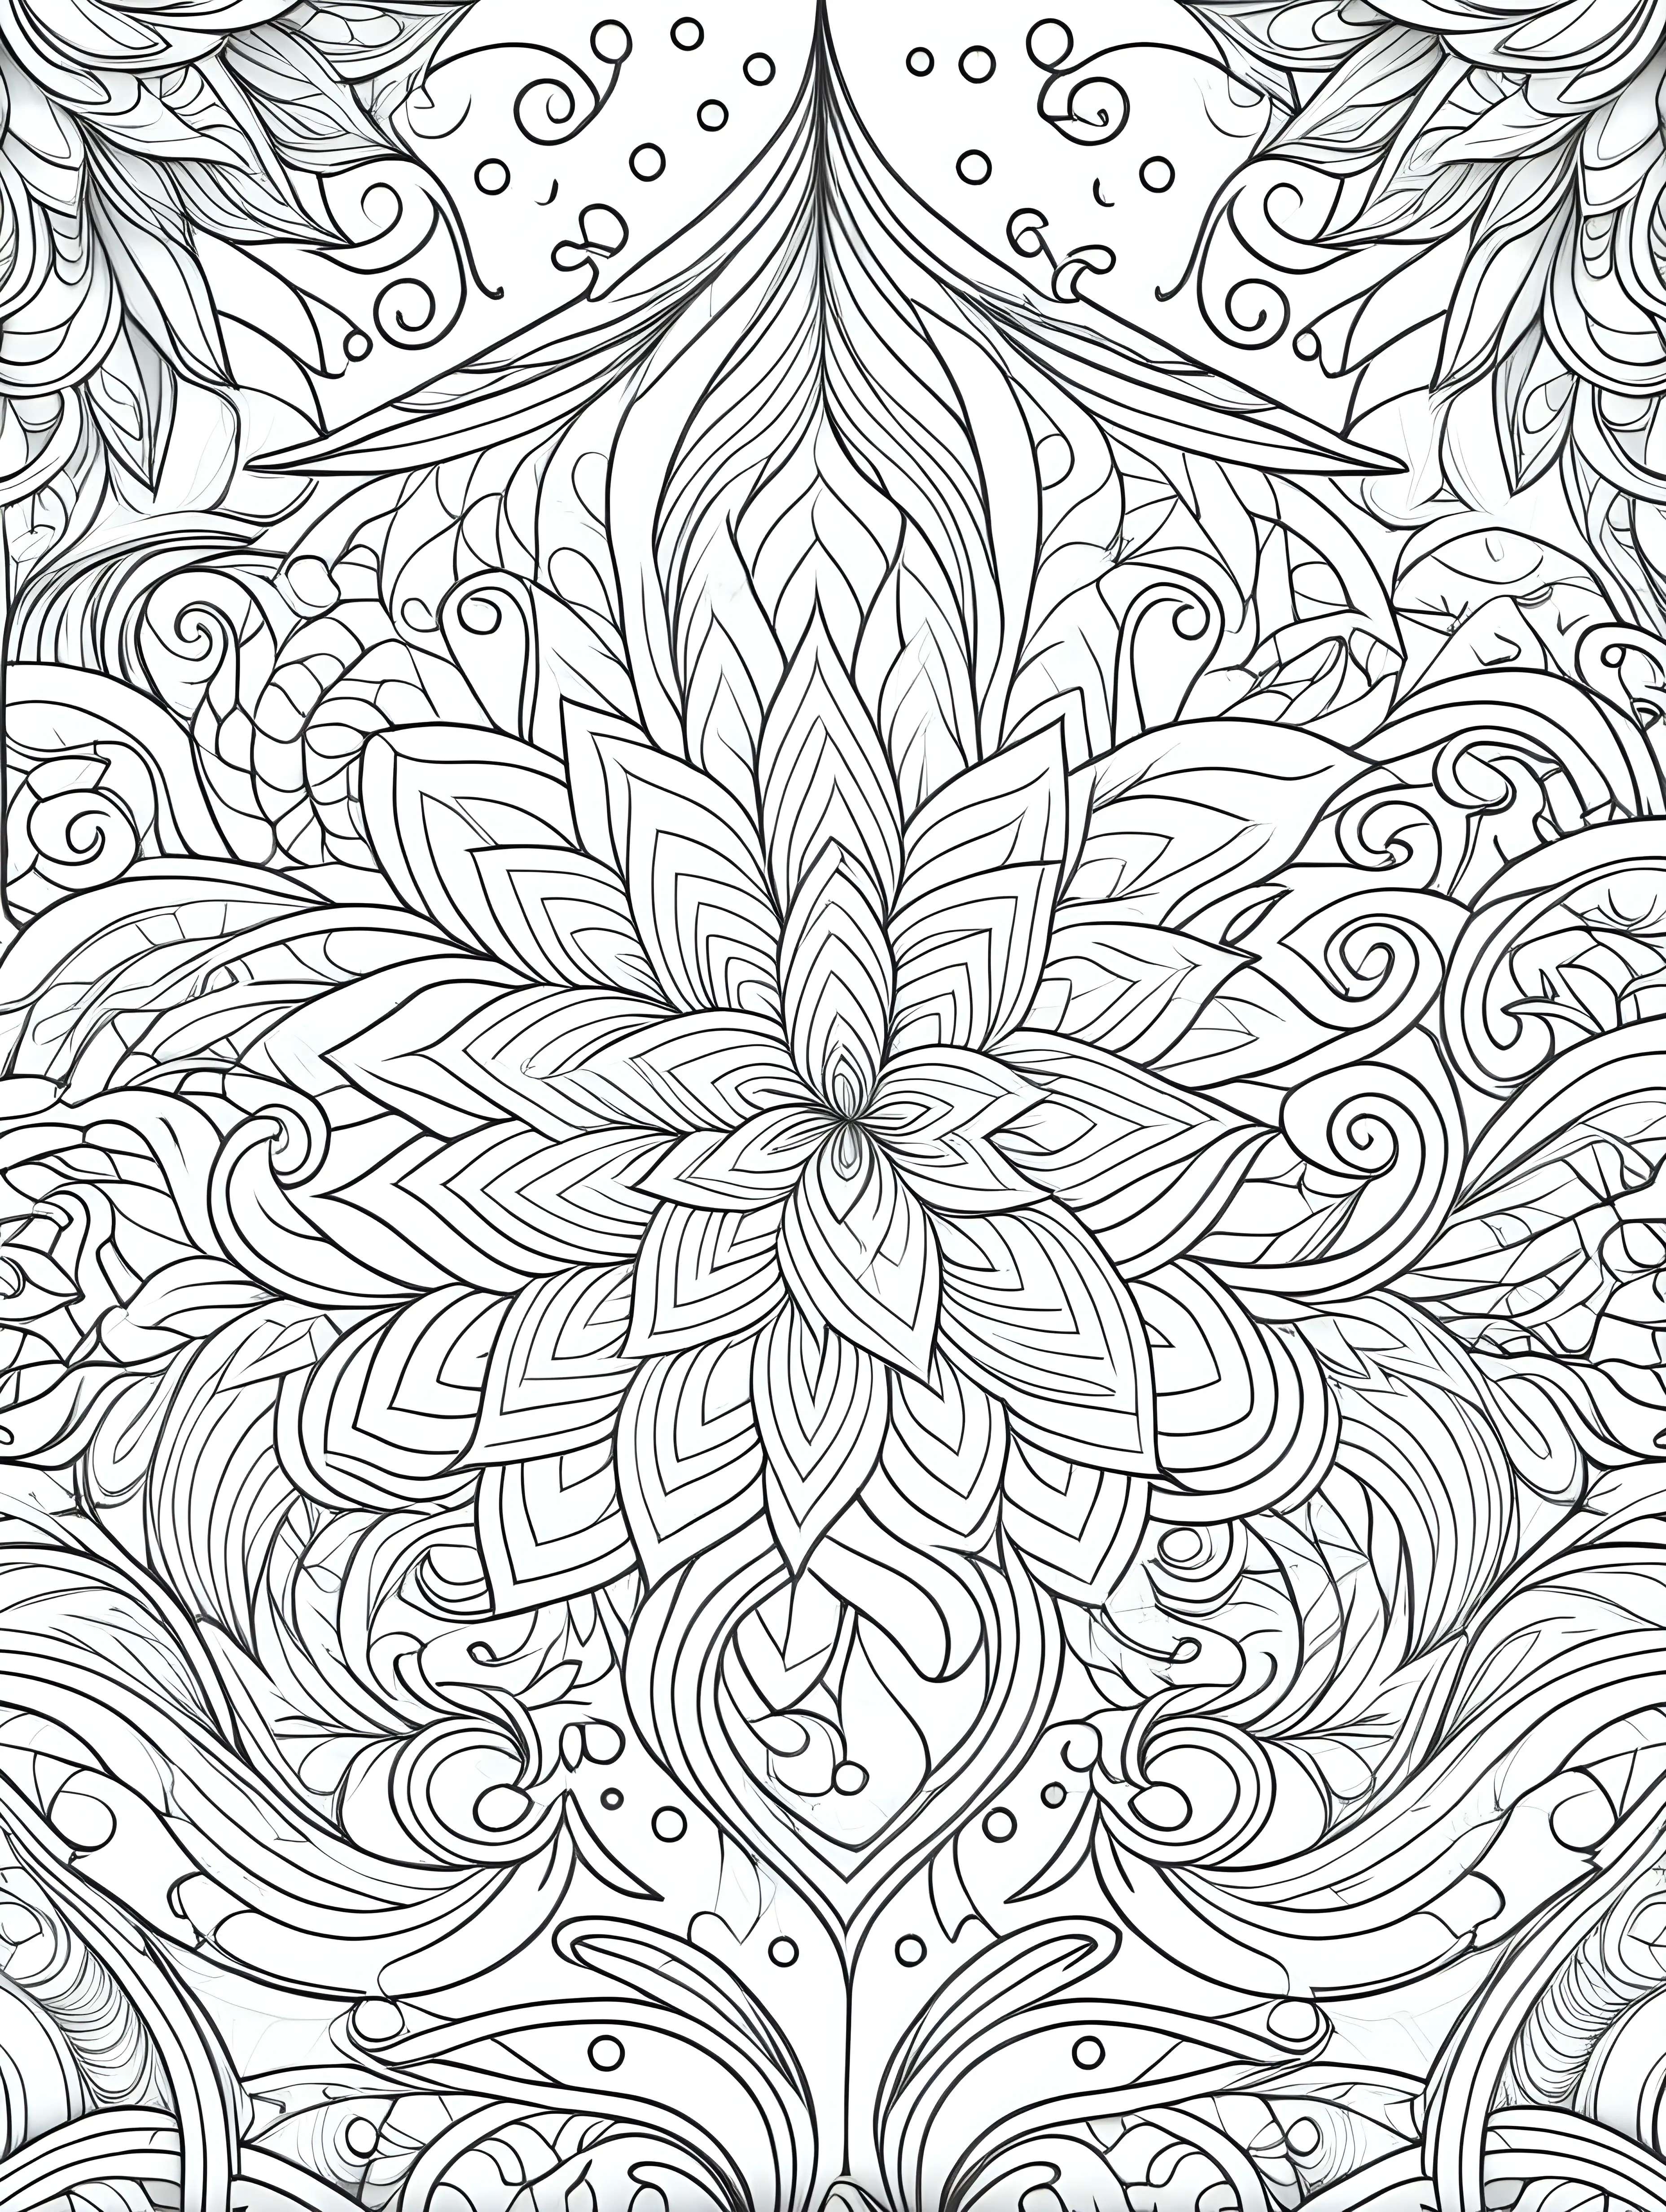 create a seamless magical pattern outline on a white clear background for a adult coloring book